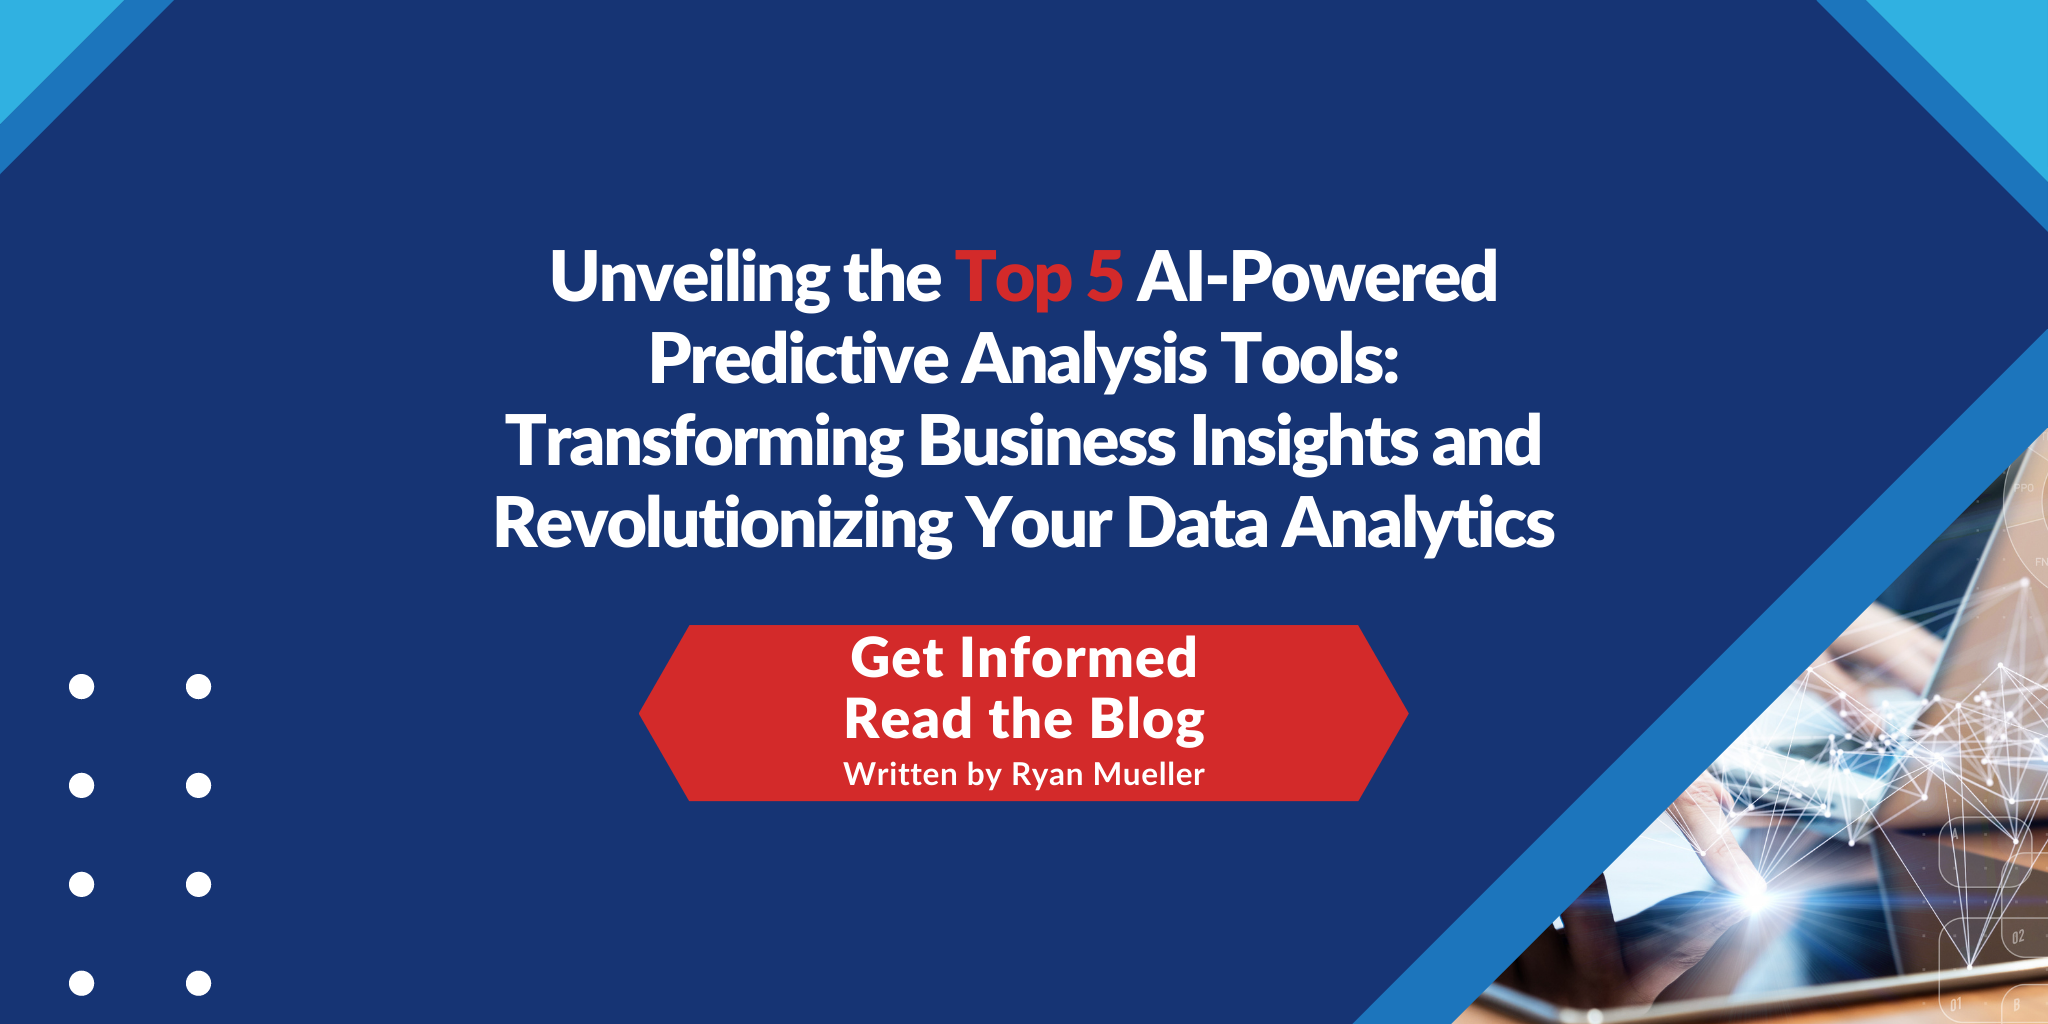 Unveiling the Top 5 AI-Powered Predictive Analysis Tools: Transforming Business Insights and Revolutionizing Your Data Analytics